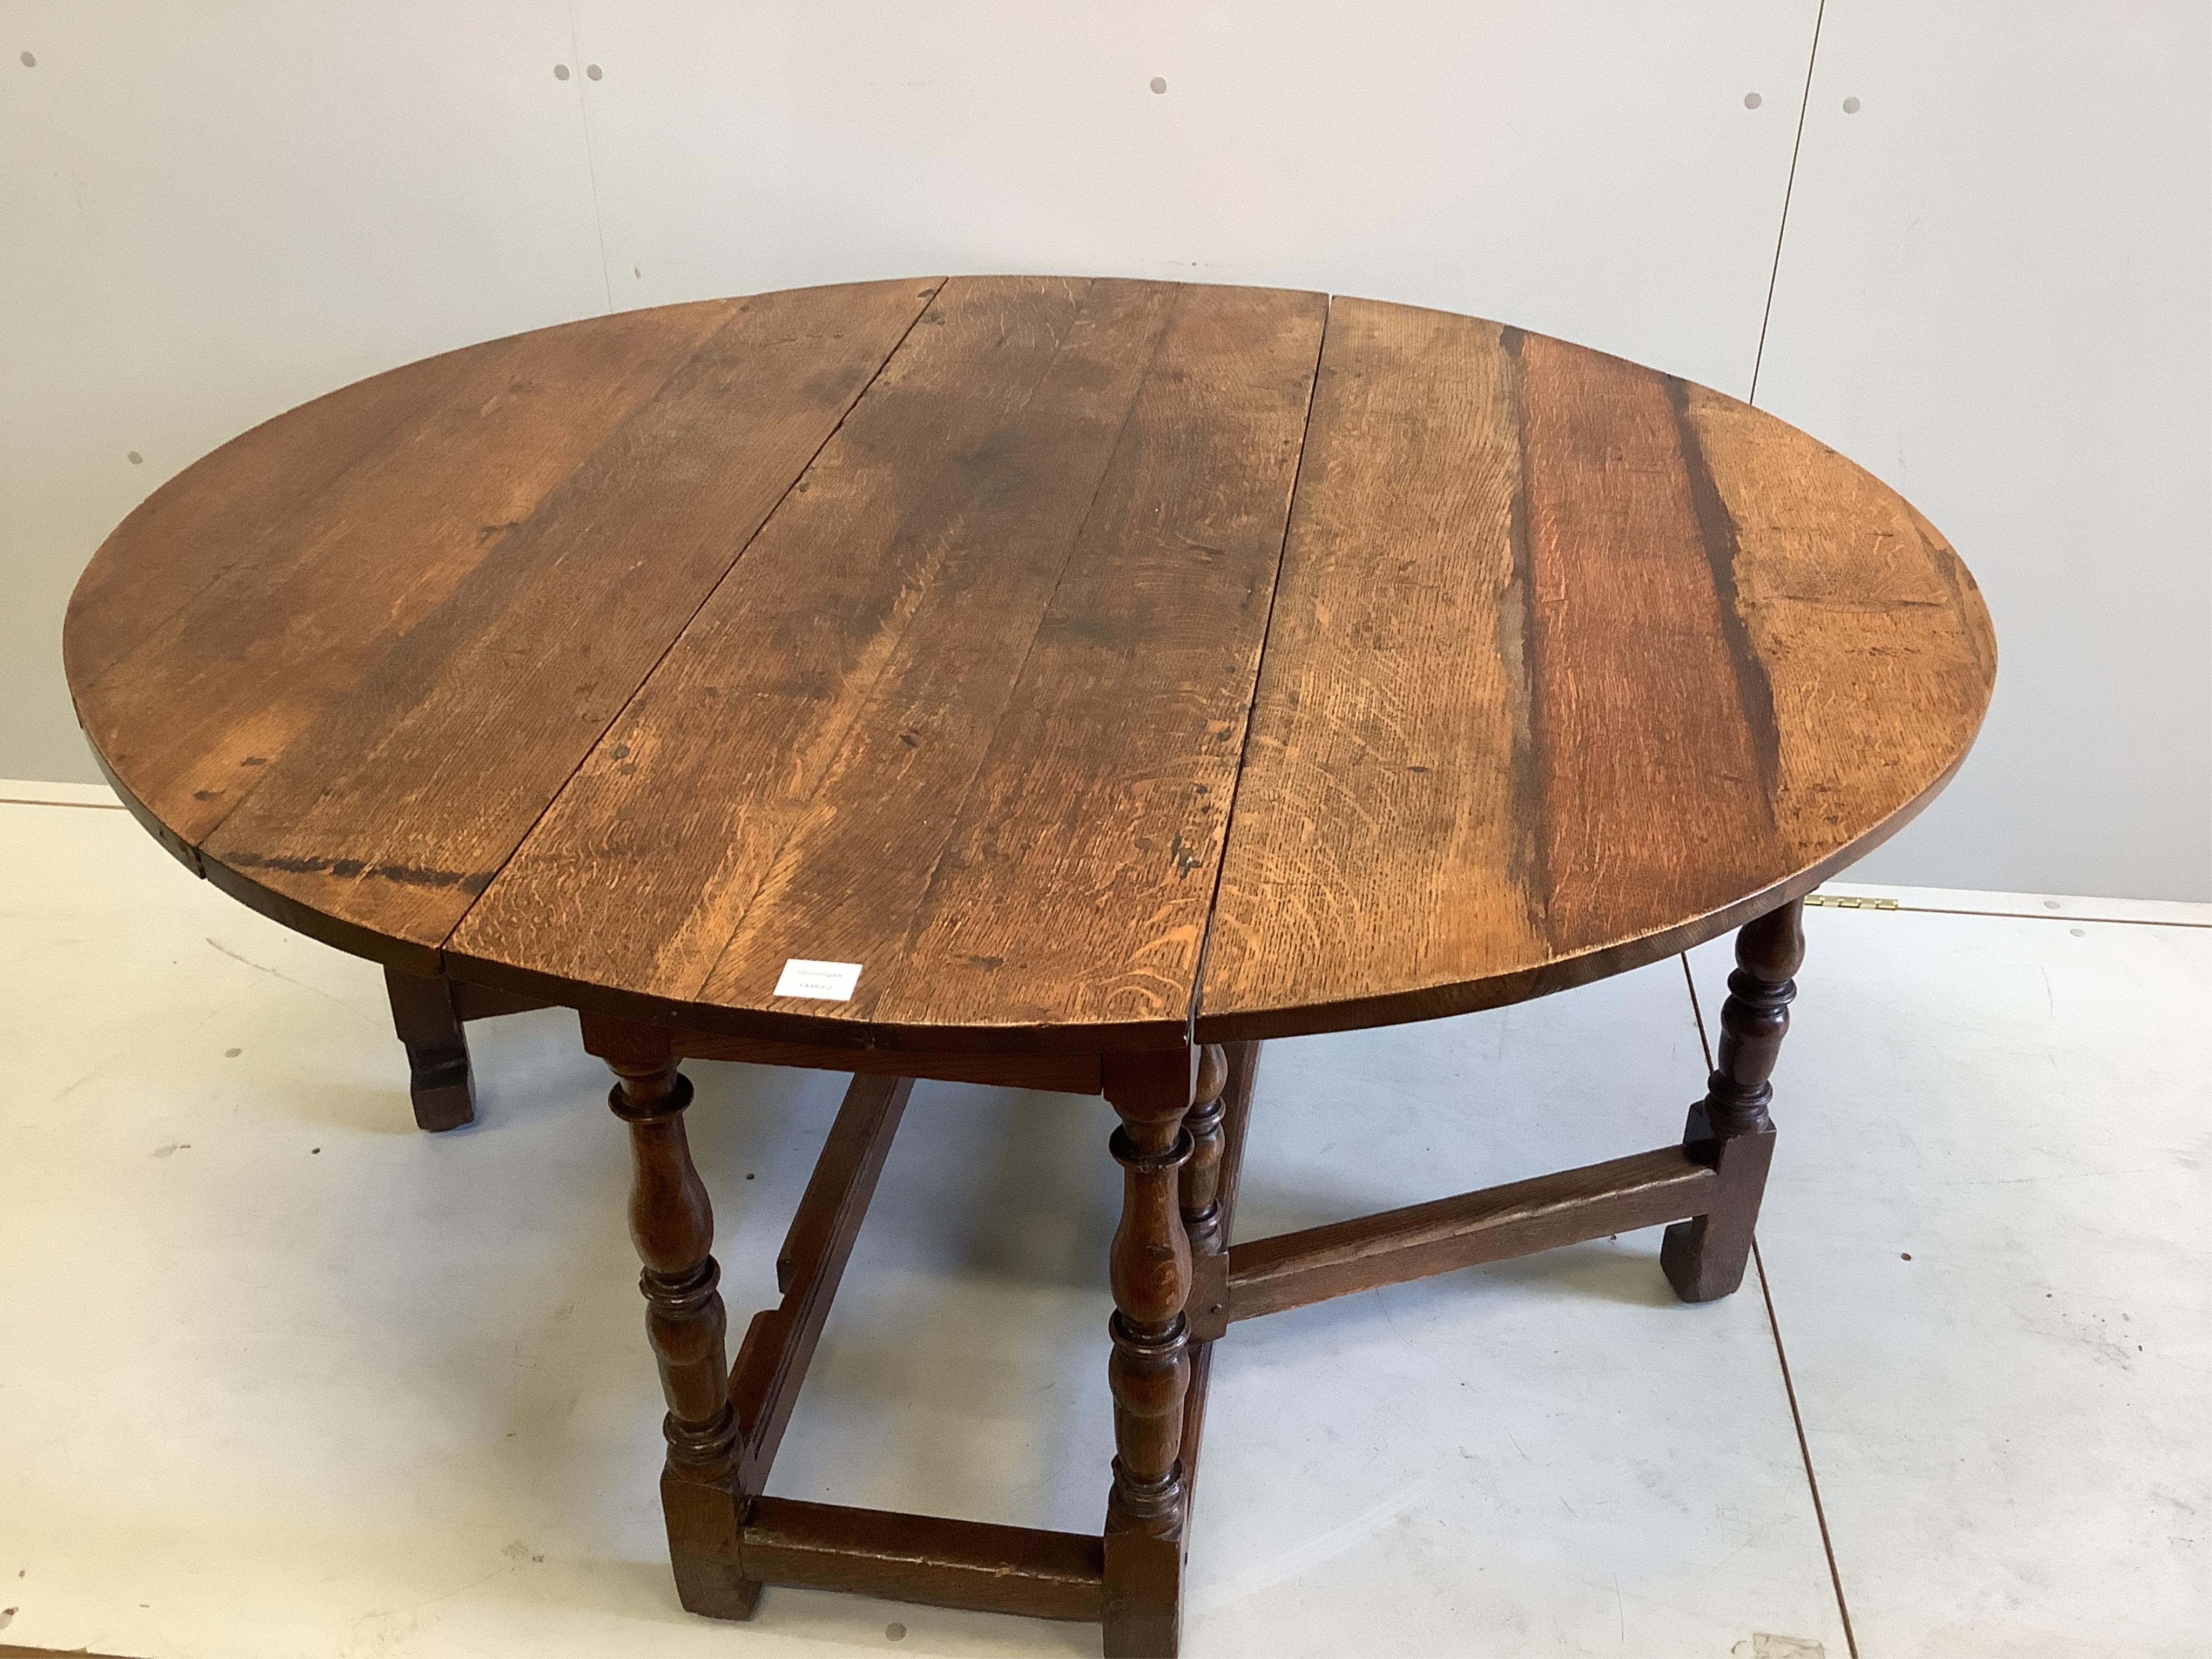 An 18th century oval oak gateleg dining table, width 139cm extended, depth 127cm, height 70cm. Condition - good